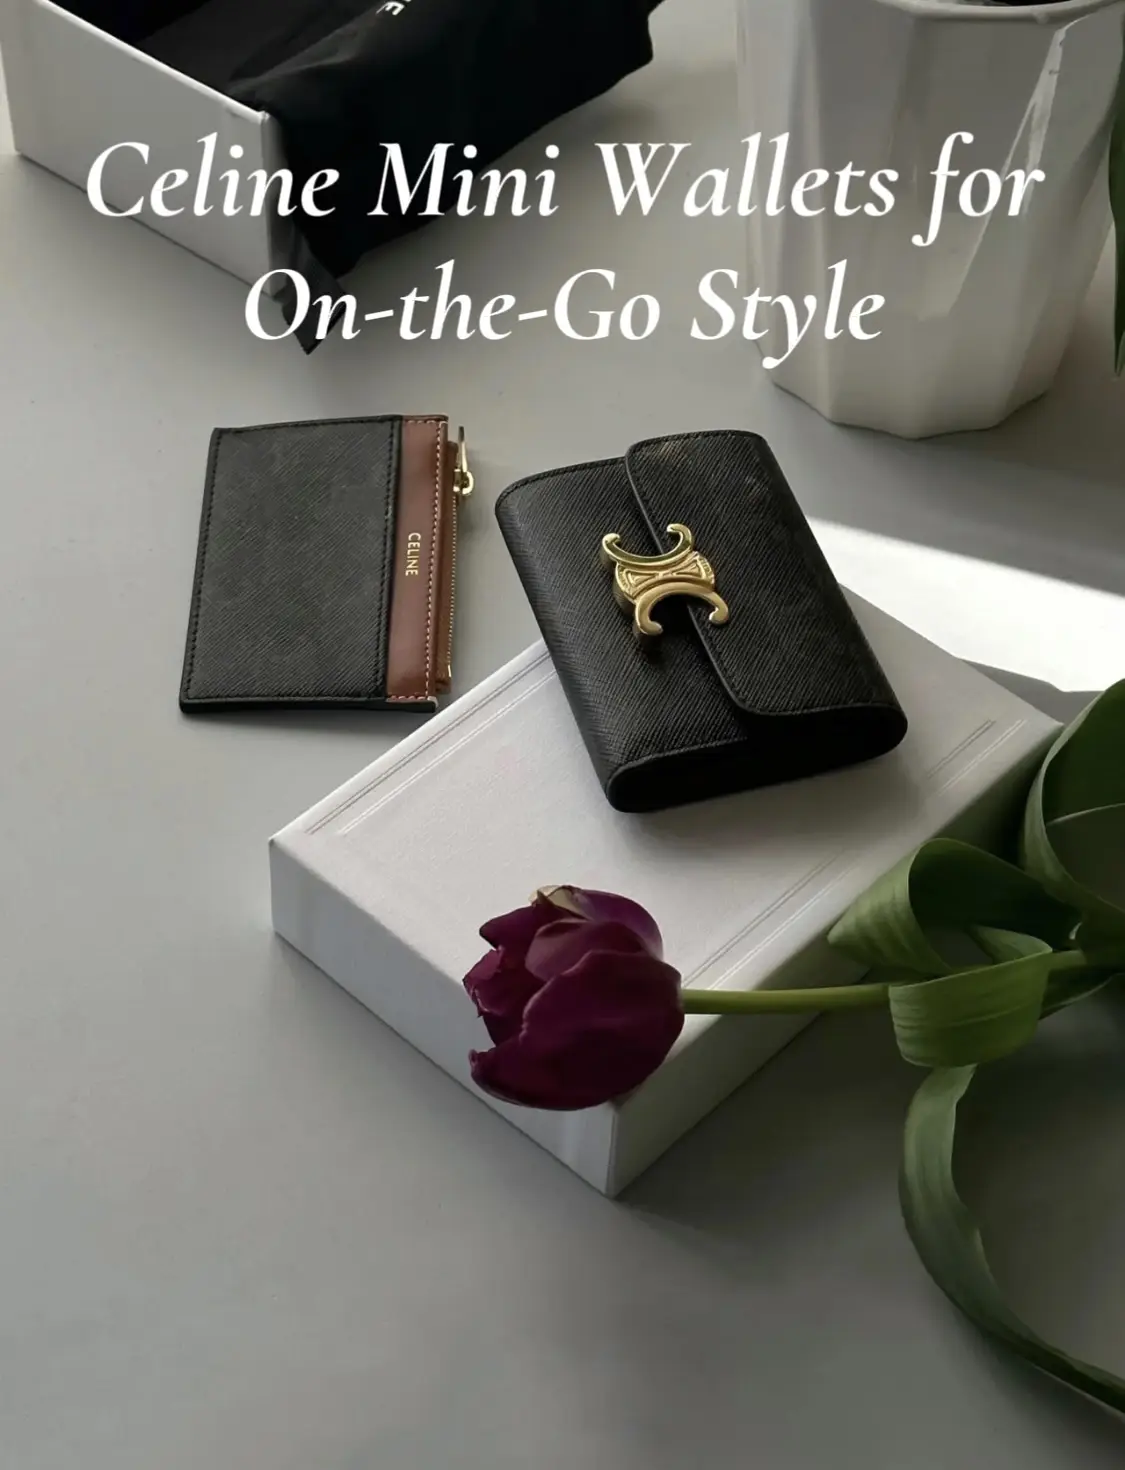 Celine Mini Wallets for On the Go Style   Gallery posted by Elliah